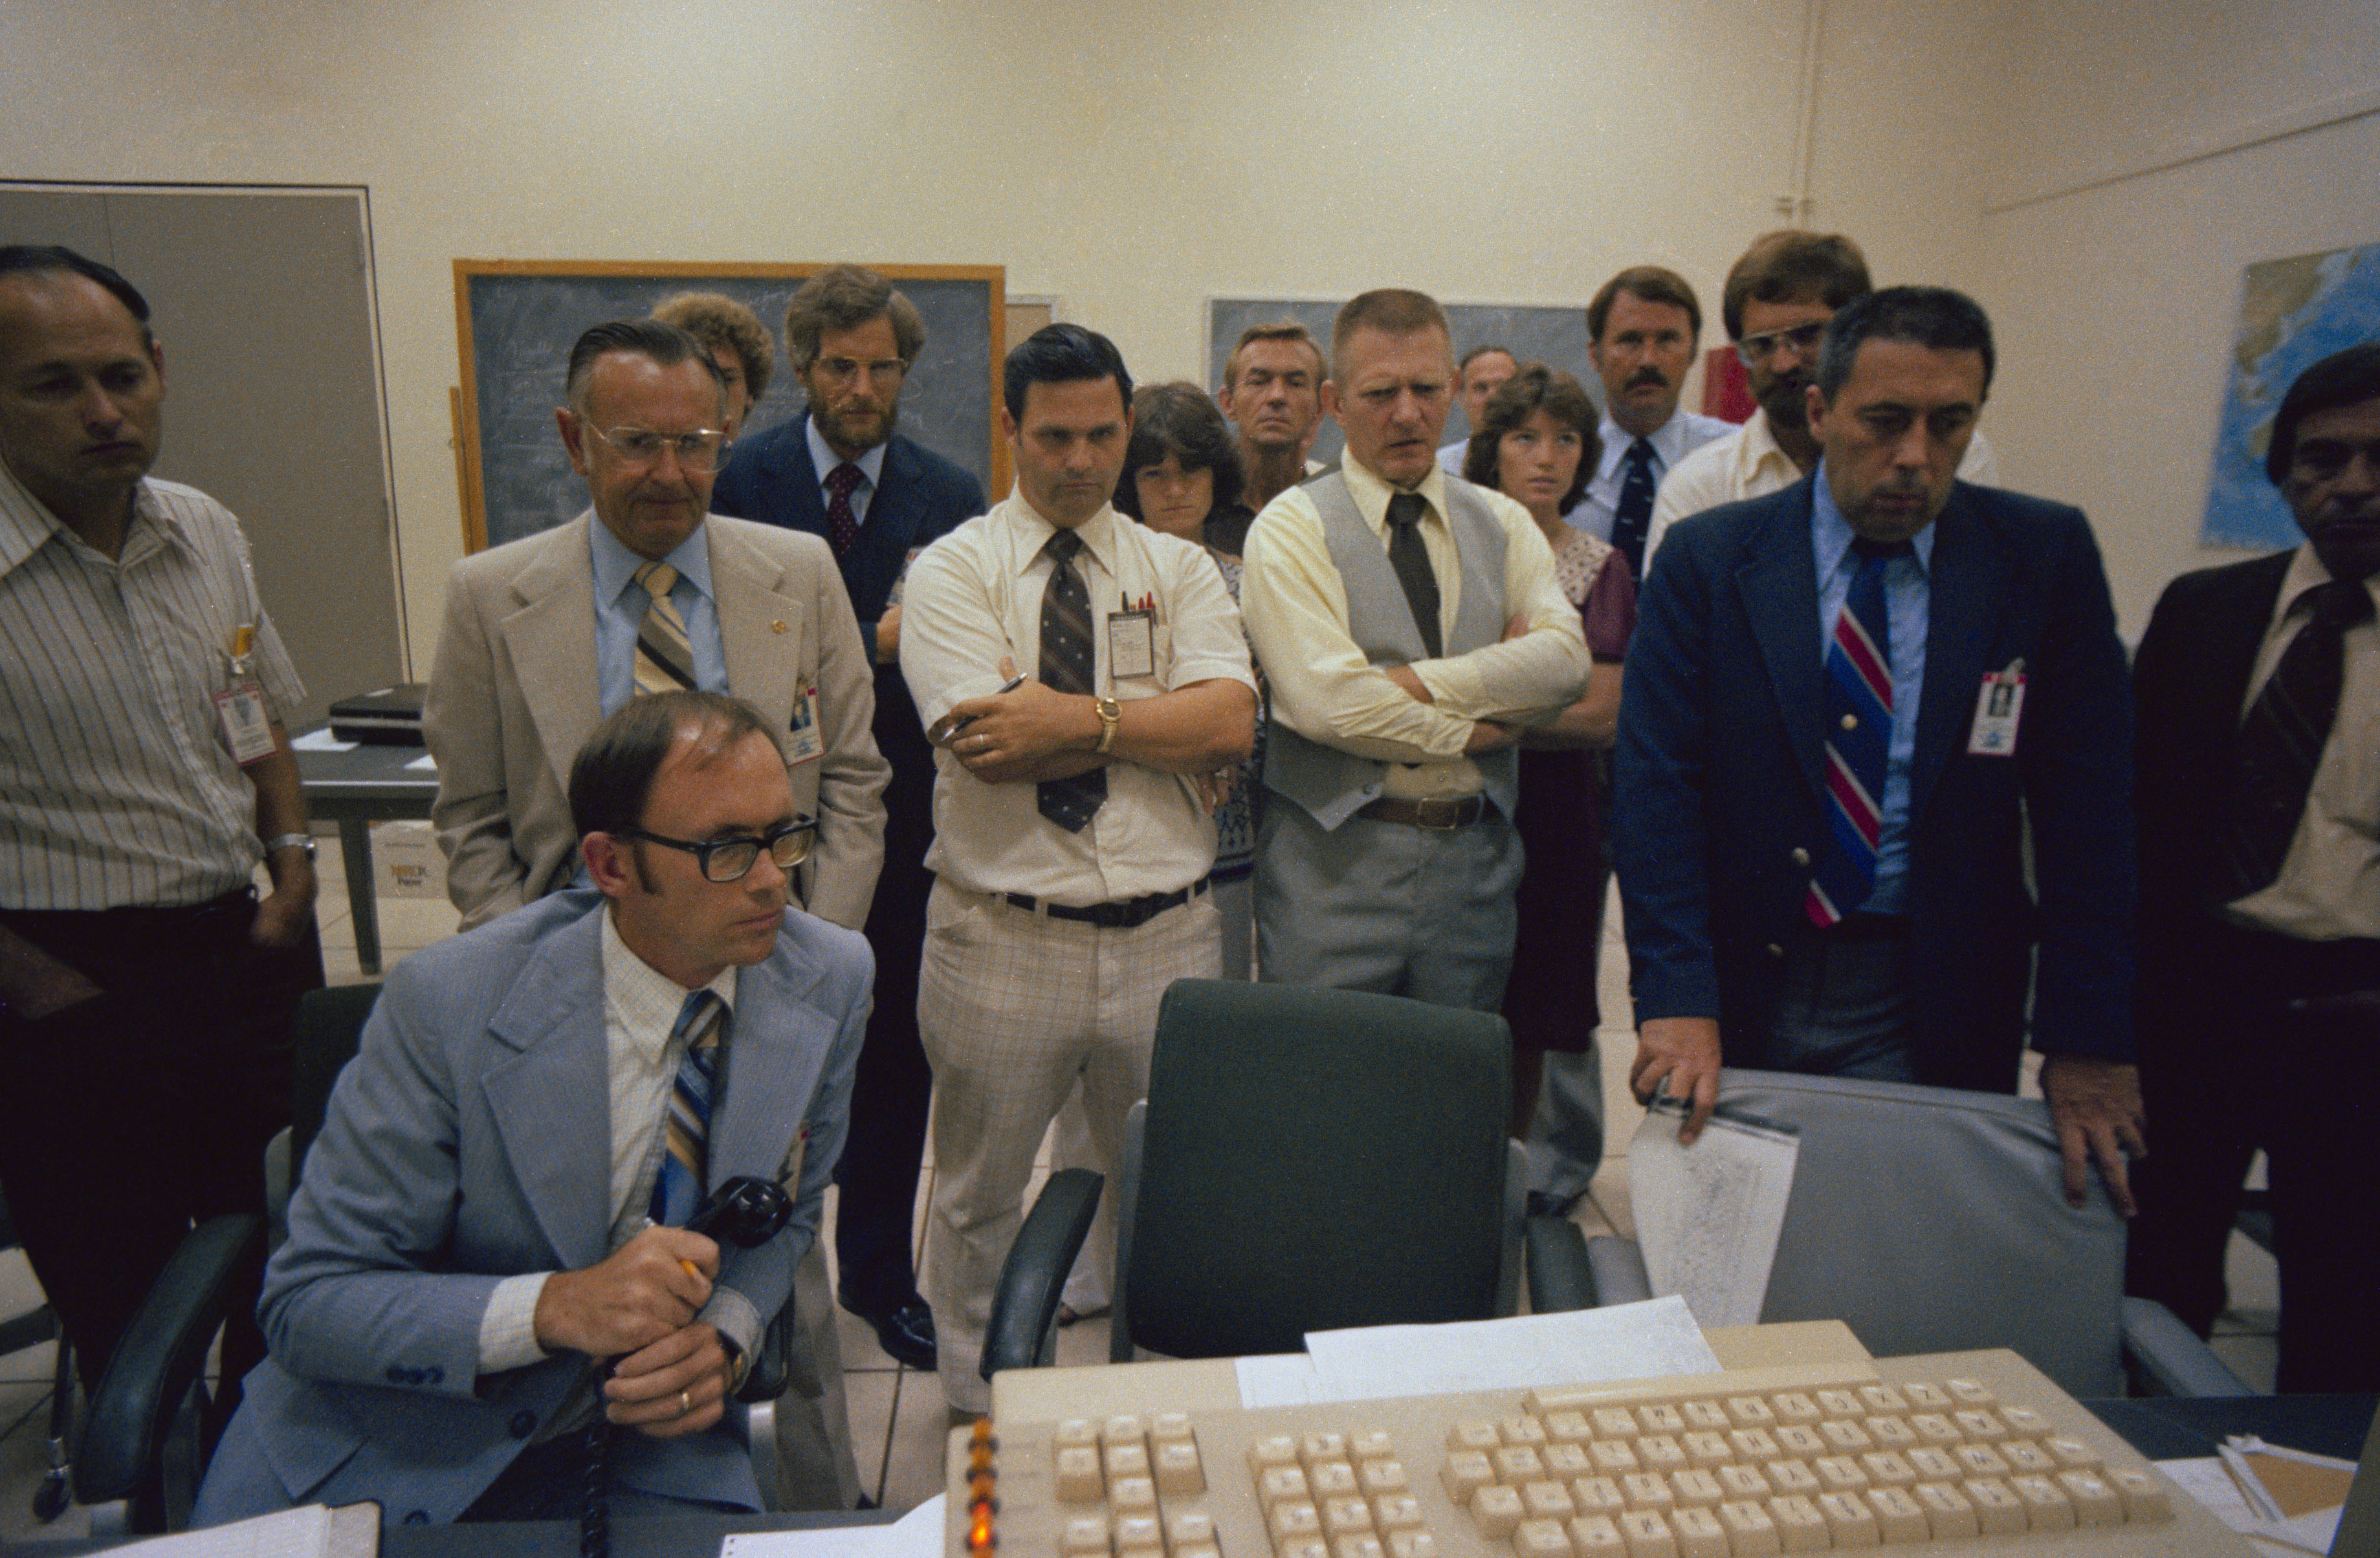 Managers, flight directors, and astronauts monitor Skylab's reentry from Mission Control at NASA's Johnson Space Center in Houston